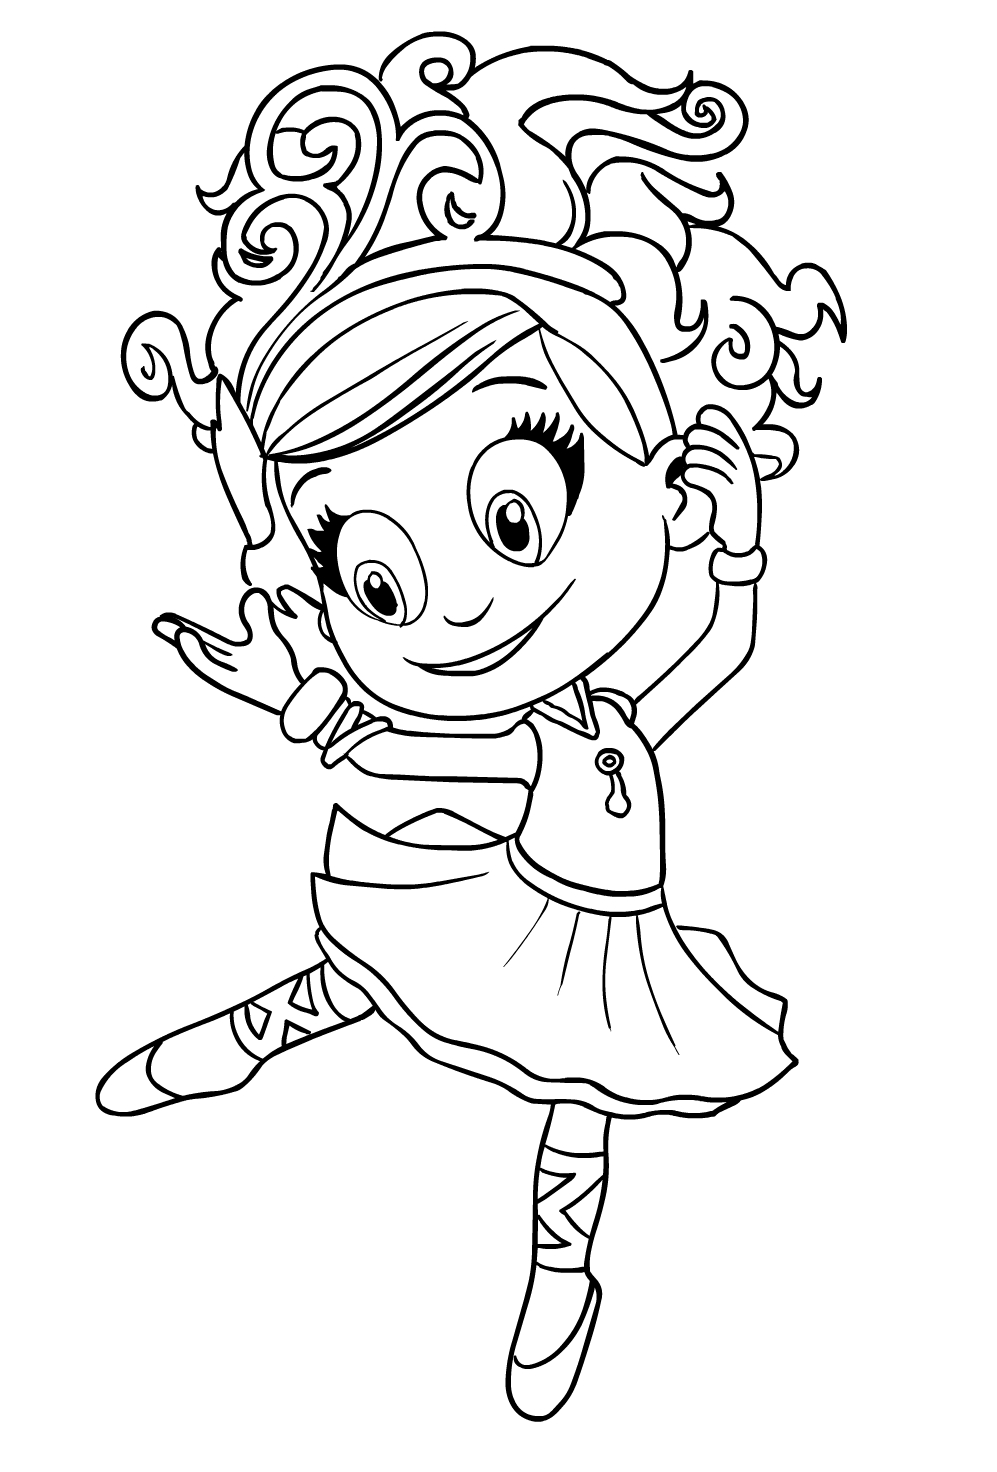 Luna Petunia   coloring page to print and coloring - Drawing 3